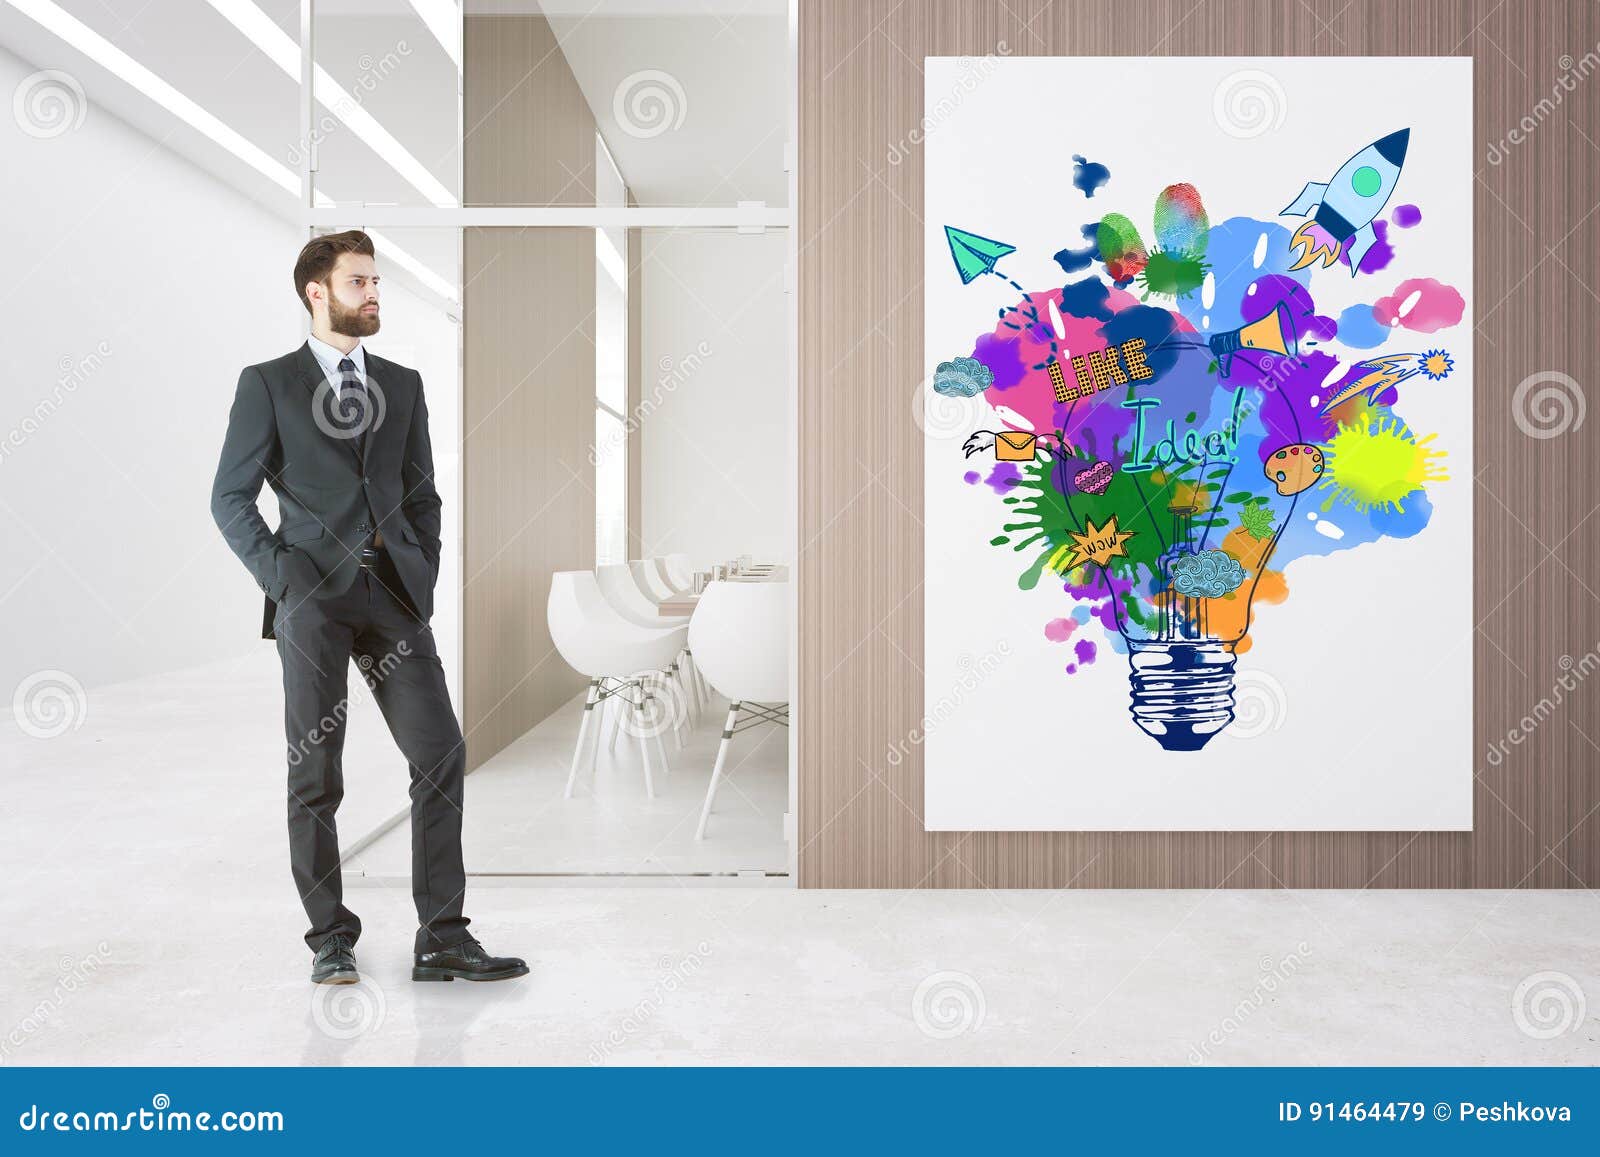 Creative startup concept stock image. Image of background - 91464479